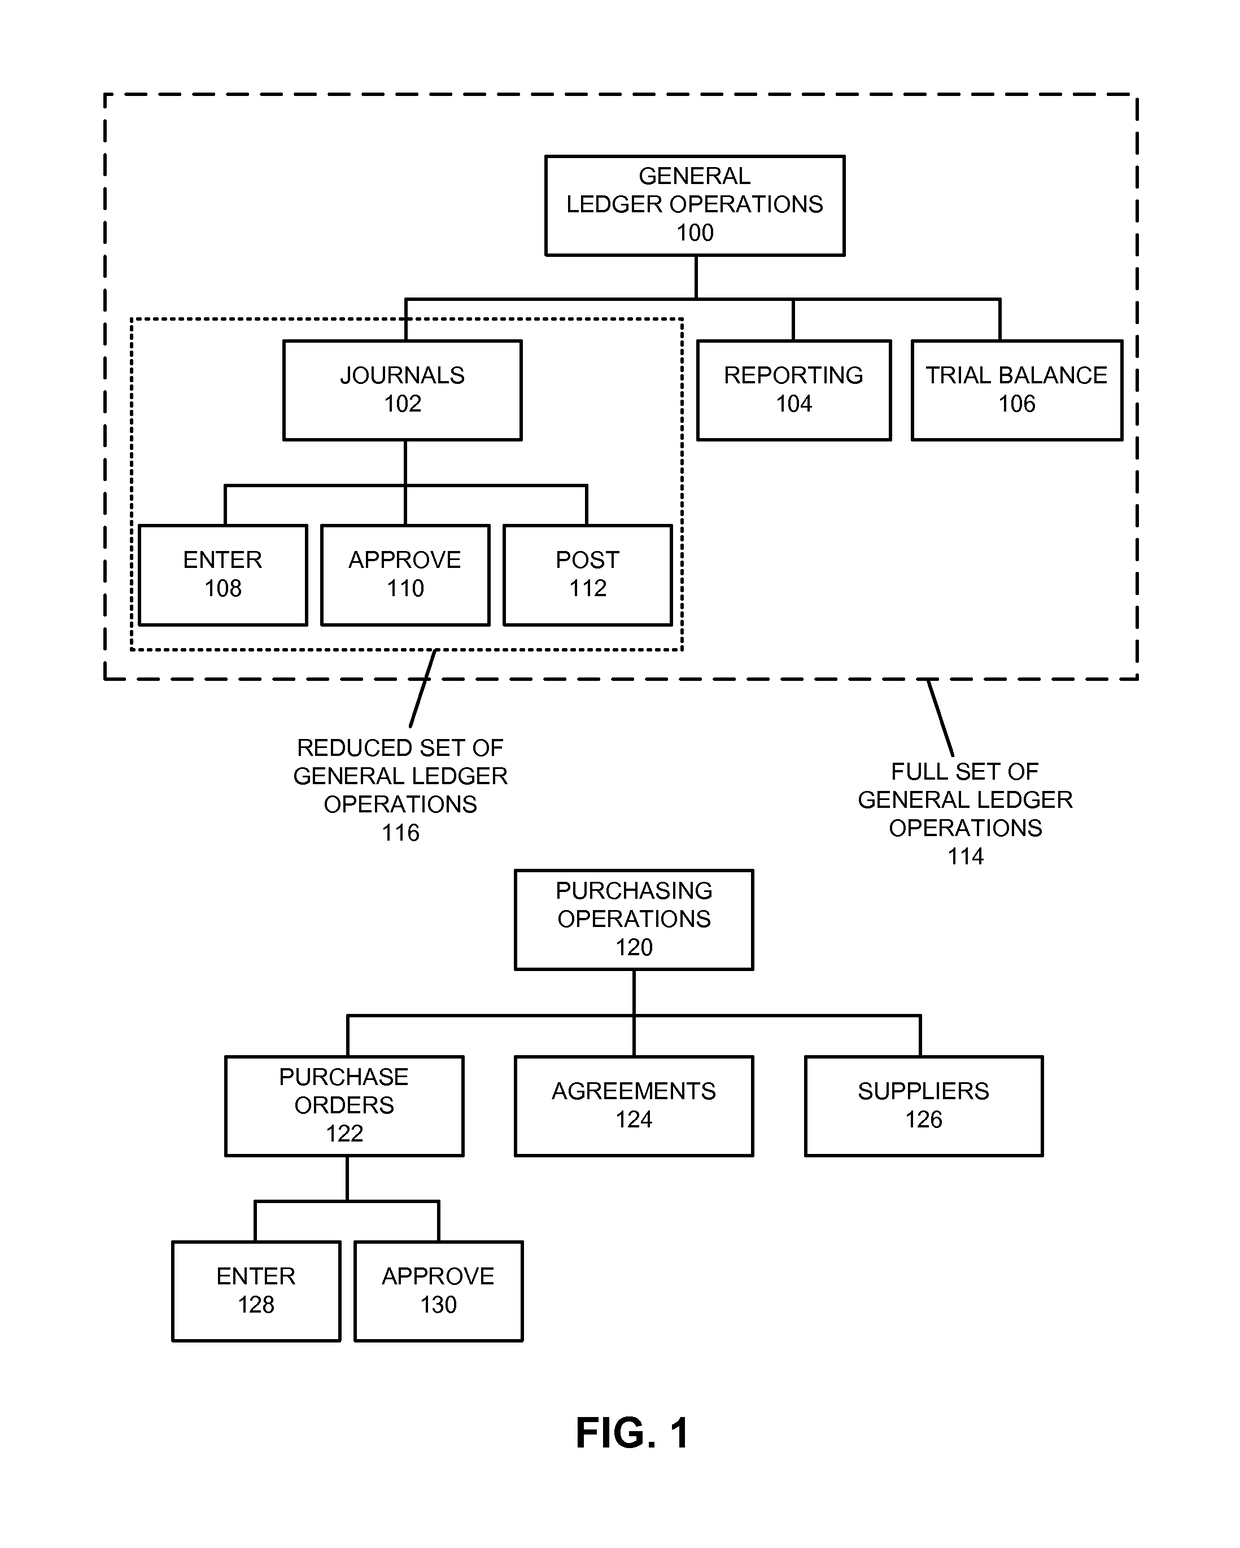 Method and apparatus for logging privilege use in a distributed computing environment